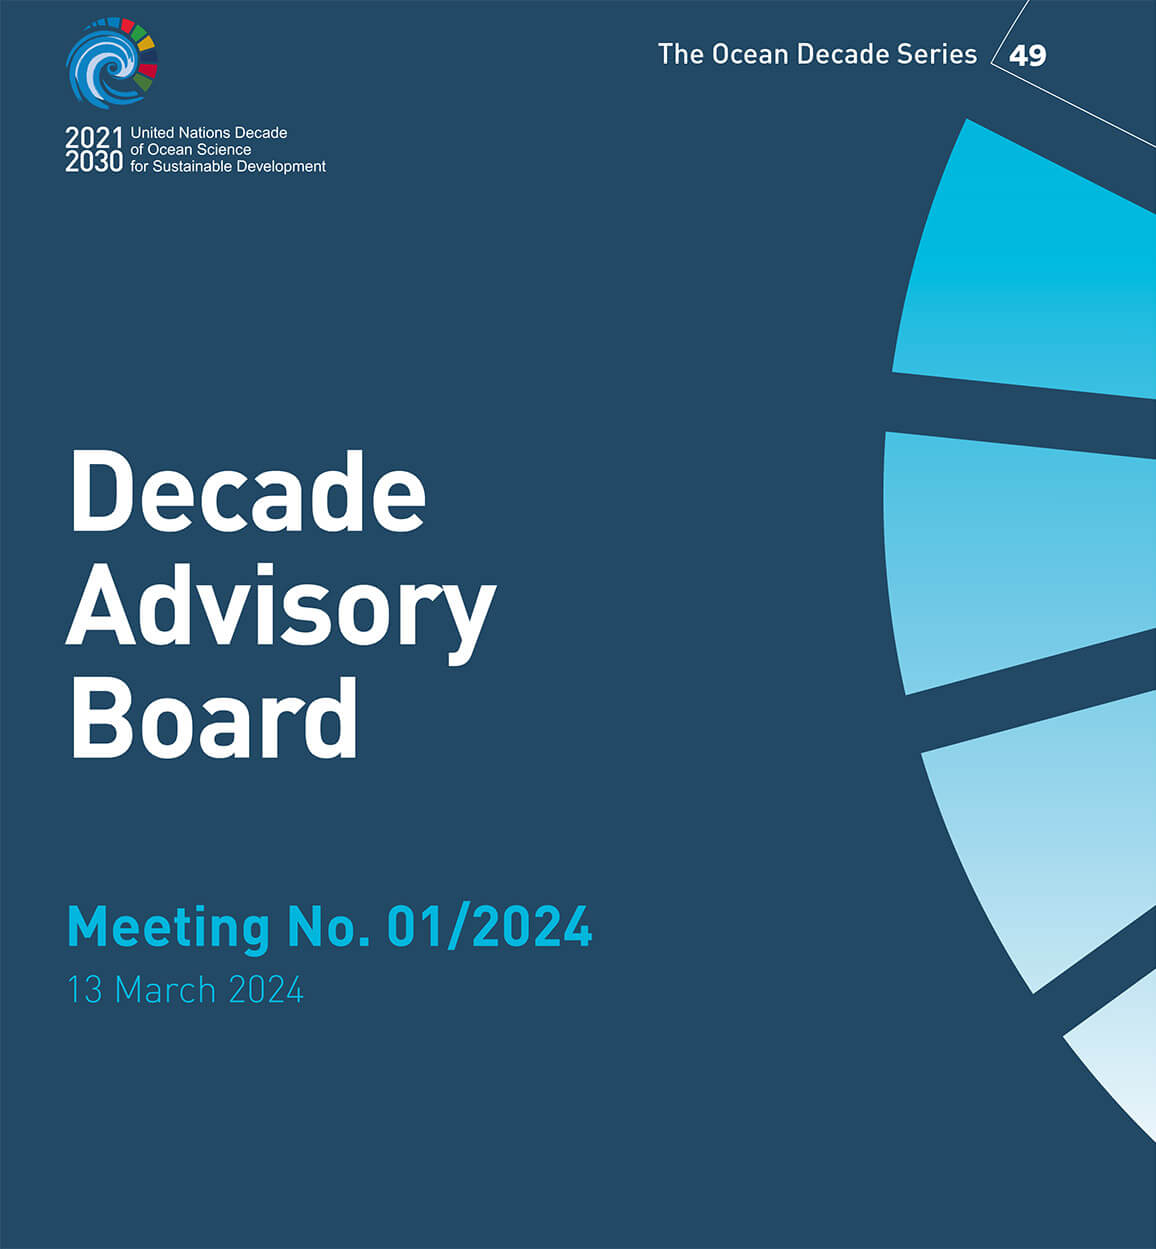 Report of the Eighth meeting of the Decade Advisory Board (13 Mars 2024)